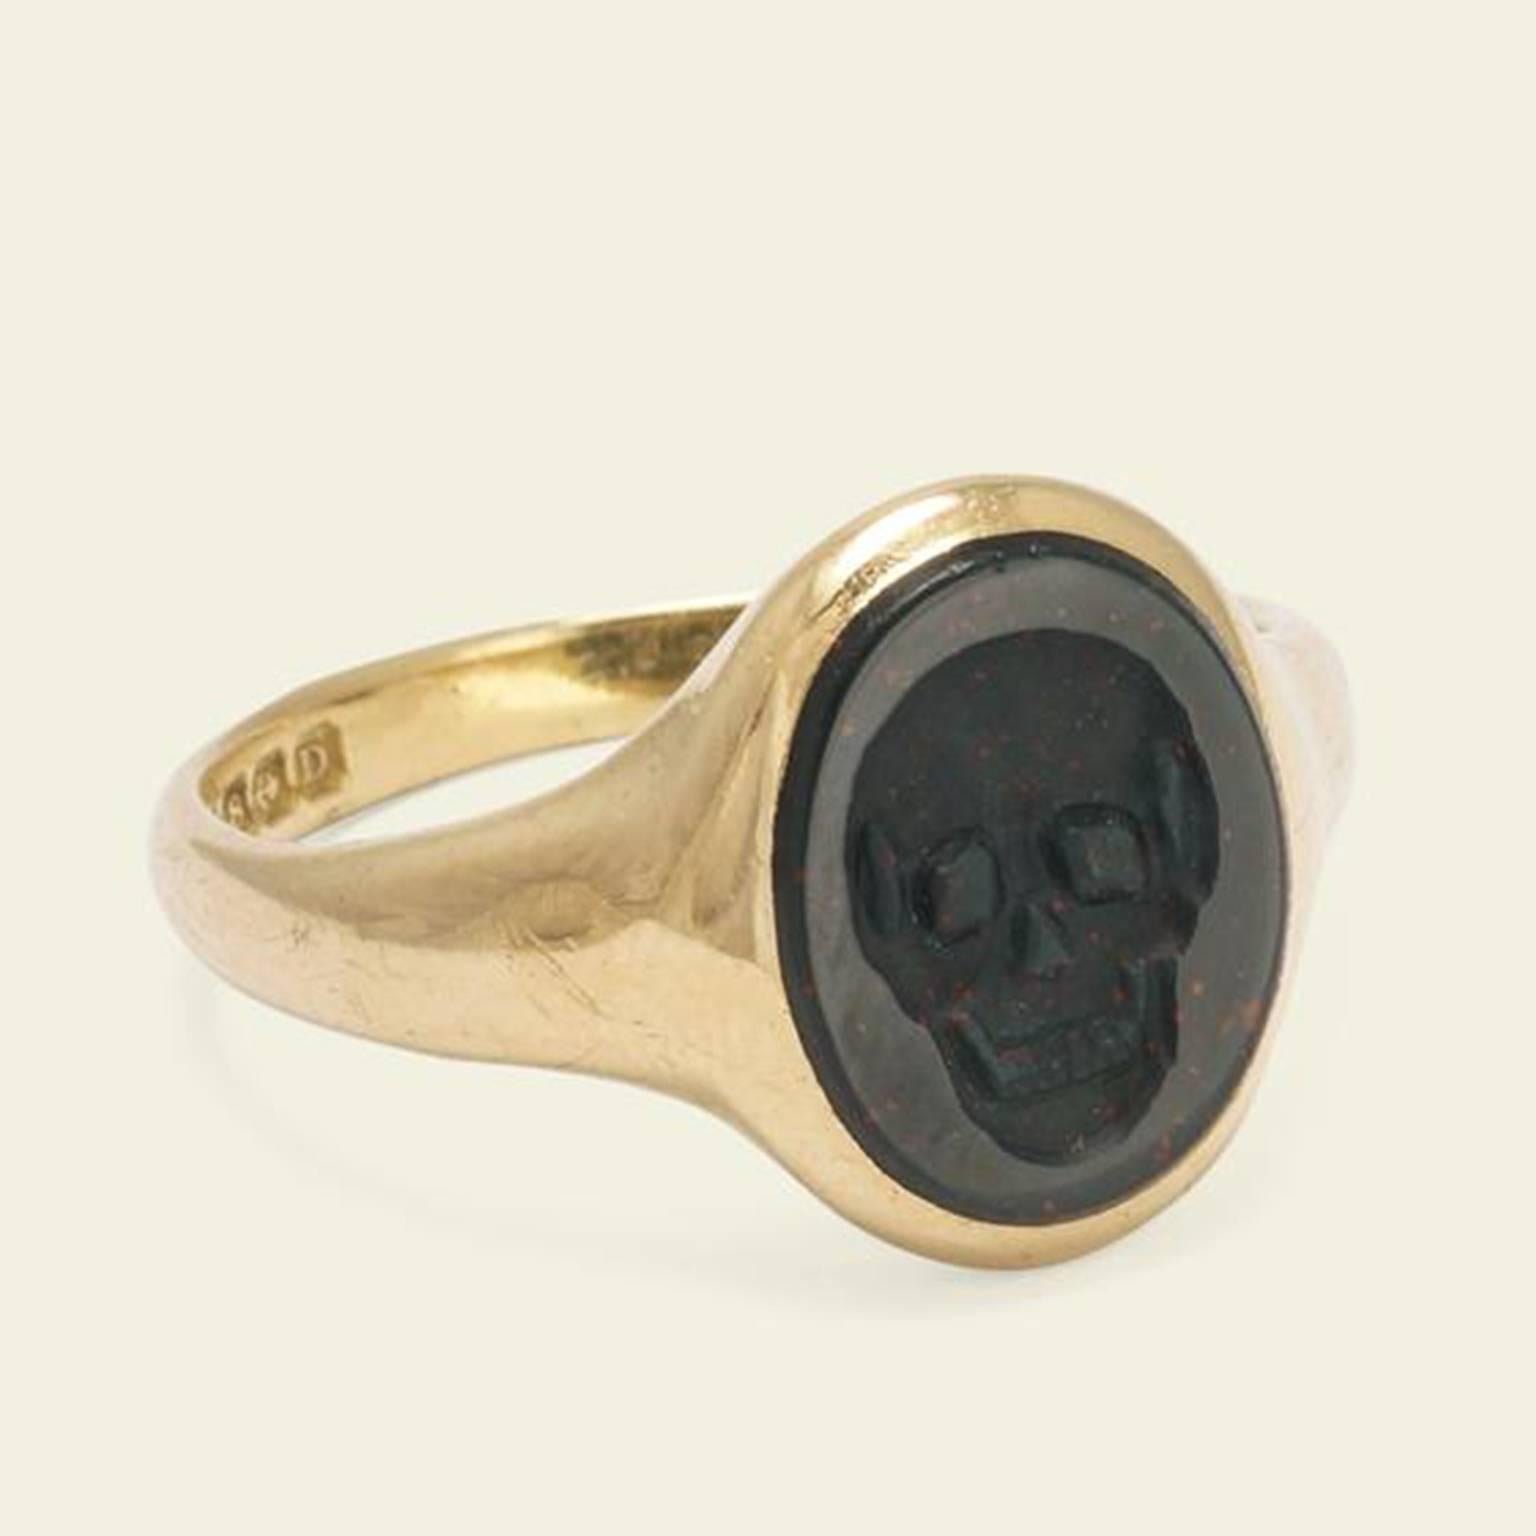 This outstanding signet ring is crafted in 18k yellow gold and bloodstone. The ring features a beautifully carved skull intaglio with smooth contours and a lovely sense of depth. The use of skull imagery is a bit unusual for the time this piece was